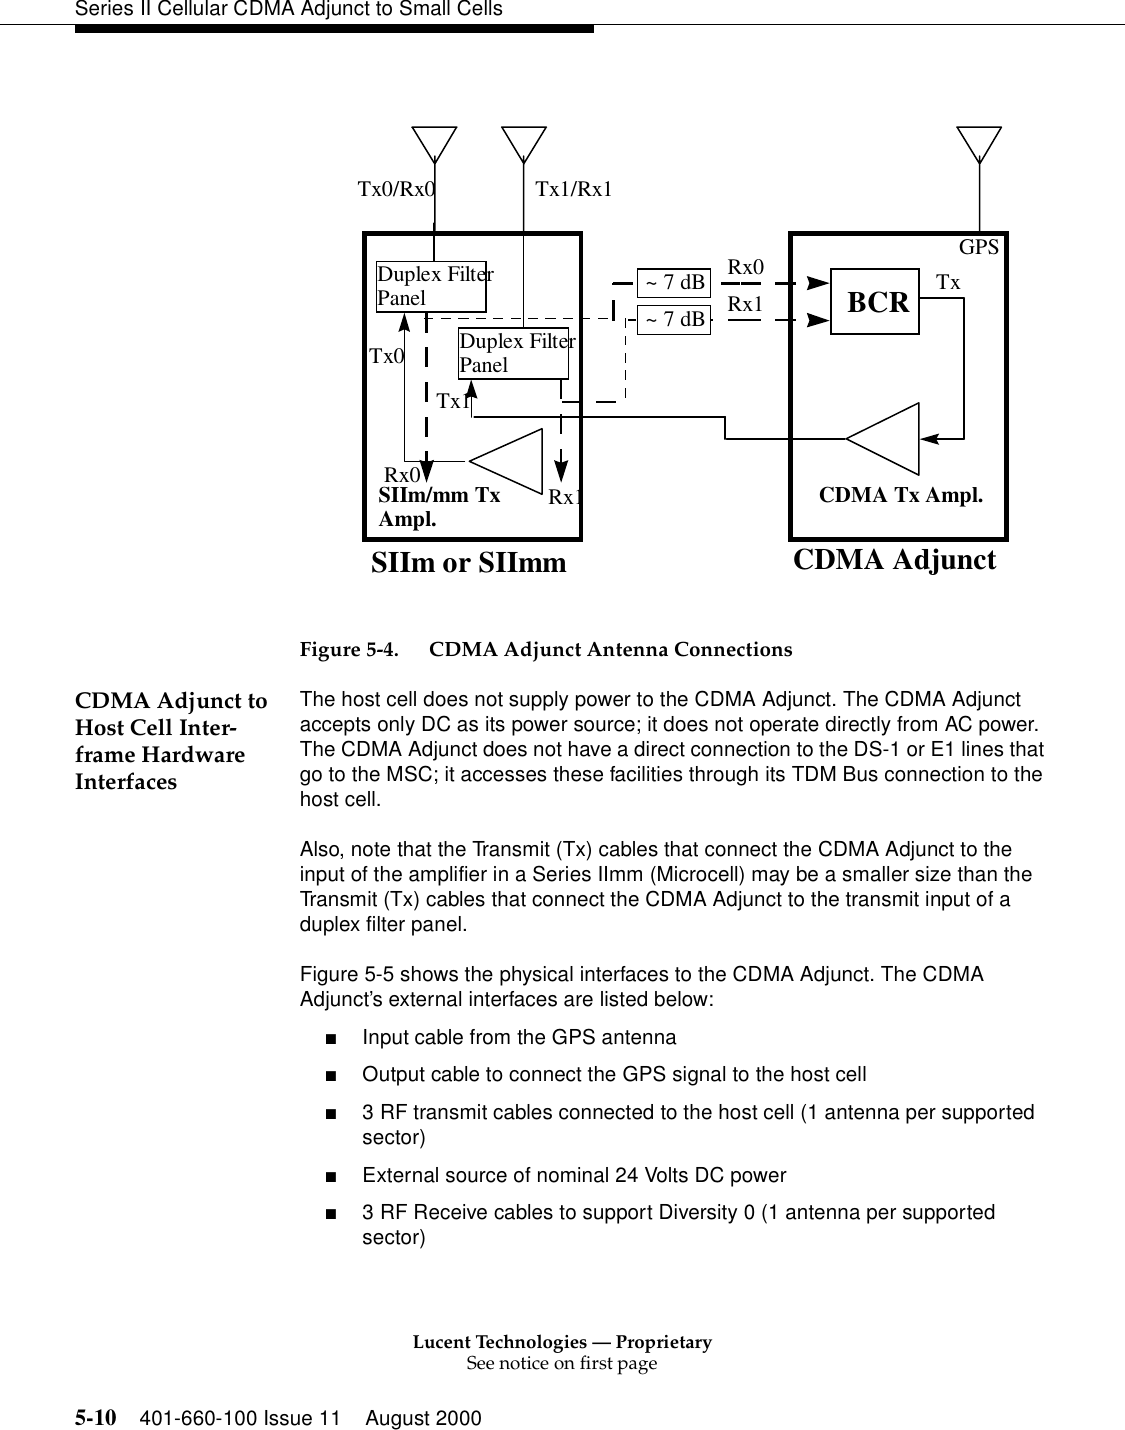 Lucent Technologies — ProprietarySee notice on first page5-10 401-660-100 Issue 11 August 2000Series II Cellular CDMA Adjunct to Small CellsFigure 5-4. CDMA Adjunct Antenna ConnectionsCDMA Adjunct to Host Cell Inter-frame Hardware InterfacesThe host cell does not supply power to the CDMA Adjunct. The CDMA Adjunct accepts only DC as its power source; it does not operate directly from AC power. The CDMA Adjunct does not have a direct connection to the DS-1 or E1 lines that go to the MSC; it accesses these facilities through its TDM Bus connection to the host cell.Also, note that the Transmit (Tx) cables that connect the CDMA Adjunct to the input of the amplifier in a Series IImm (Microcell) may be a smaller size than the Transmit (Tx) cables that connect the CDMA Adjunct to the transmit input of a duplex filter panel.Figure 5-5 shows the physical interfaces to the CDMA Adjunct. The CDMA Adjunct’s external interfaces are listed below:■Input cable from the GPS antenna■Output cable to connect the GPS signal to the host cell■3 RF transmit cables connected to the host cell (1 antenna per supported sector)■External source of nominal 24 Volts DC power■3 RF Receive cables to support Diversity 0 (1 antenna per supported sector)BCRCDMA Tx Ampl.TxRx0Rx1CDMA AdjunctGPSSIIm or SIImmDuplex FilterPanelDuplex FilterPanelTx1/Rx1Tx0/Rx0SIIm/mm TxAmpl.Tx0Tx1Rx1Rx0~ 7 dB~ 7 dB